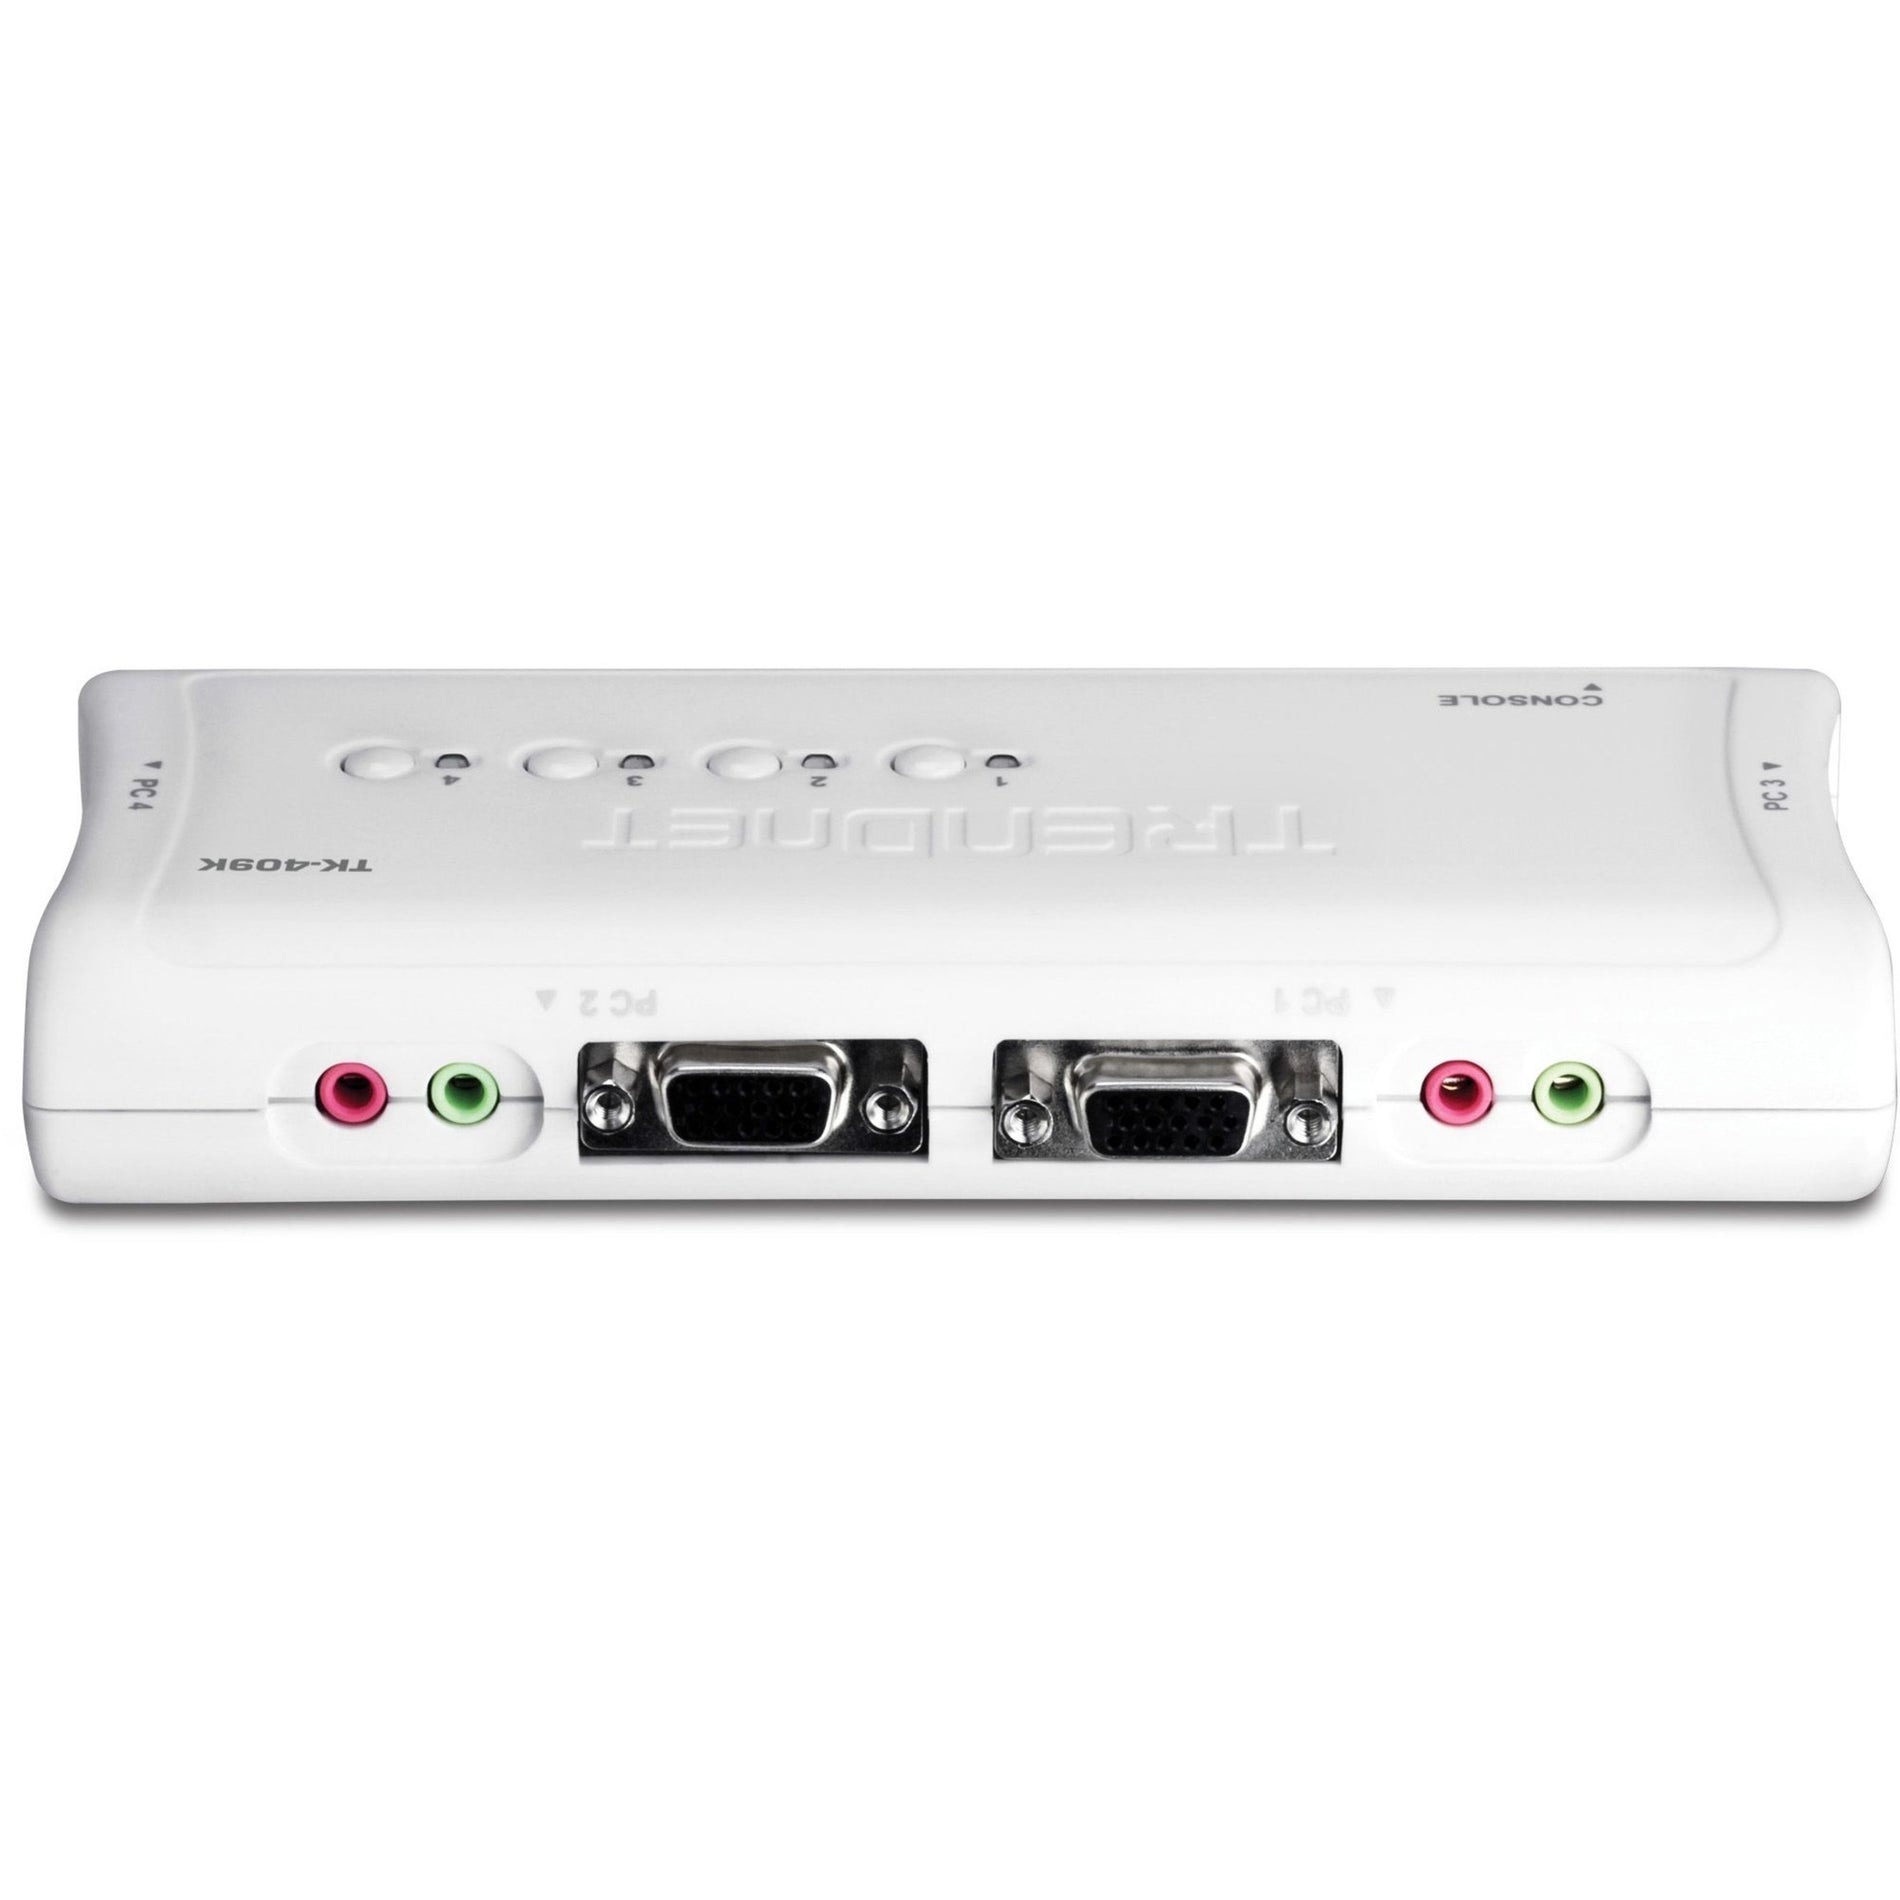 TRENDnet TK-409K 4-Port USB KVM Switch Kit with Audio, Manage 4 Computers, Plug and Play, Hot Pluggable